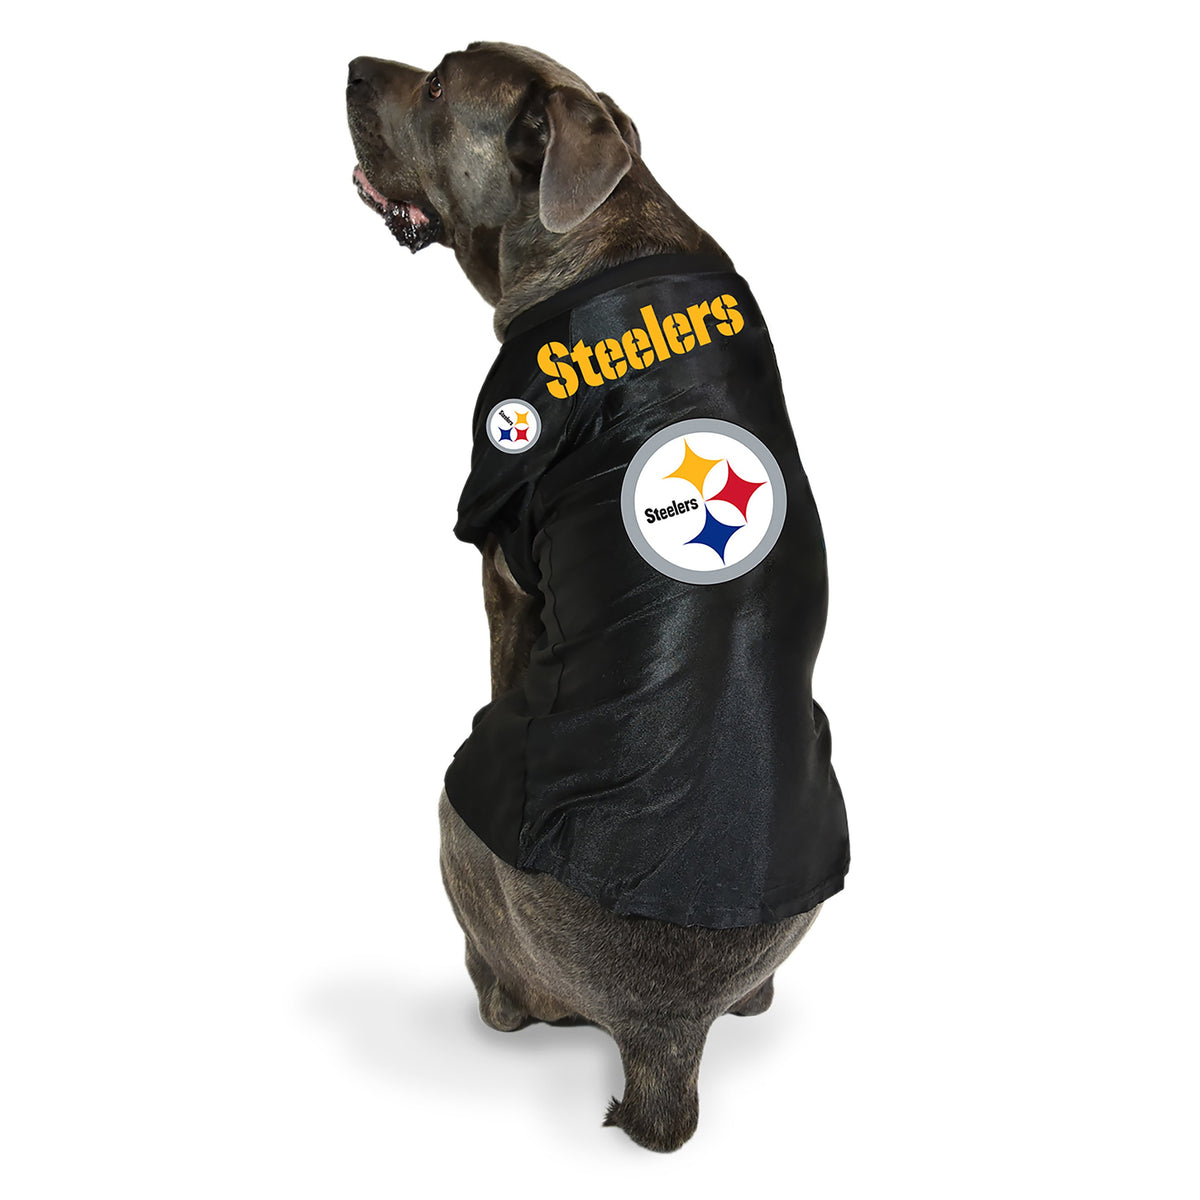  Dog Hat - Steelers Sports Fabric : Handmade Products